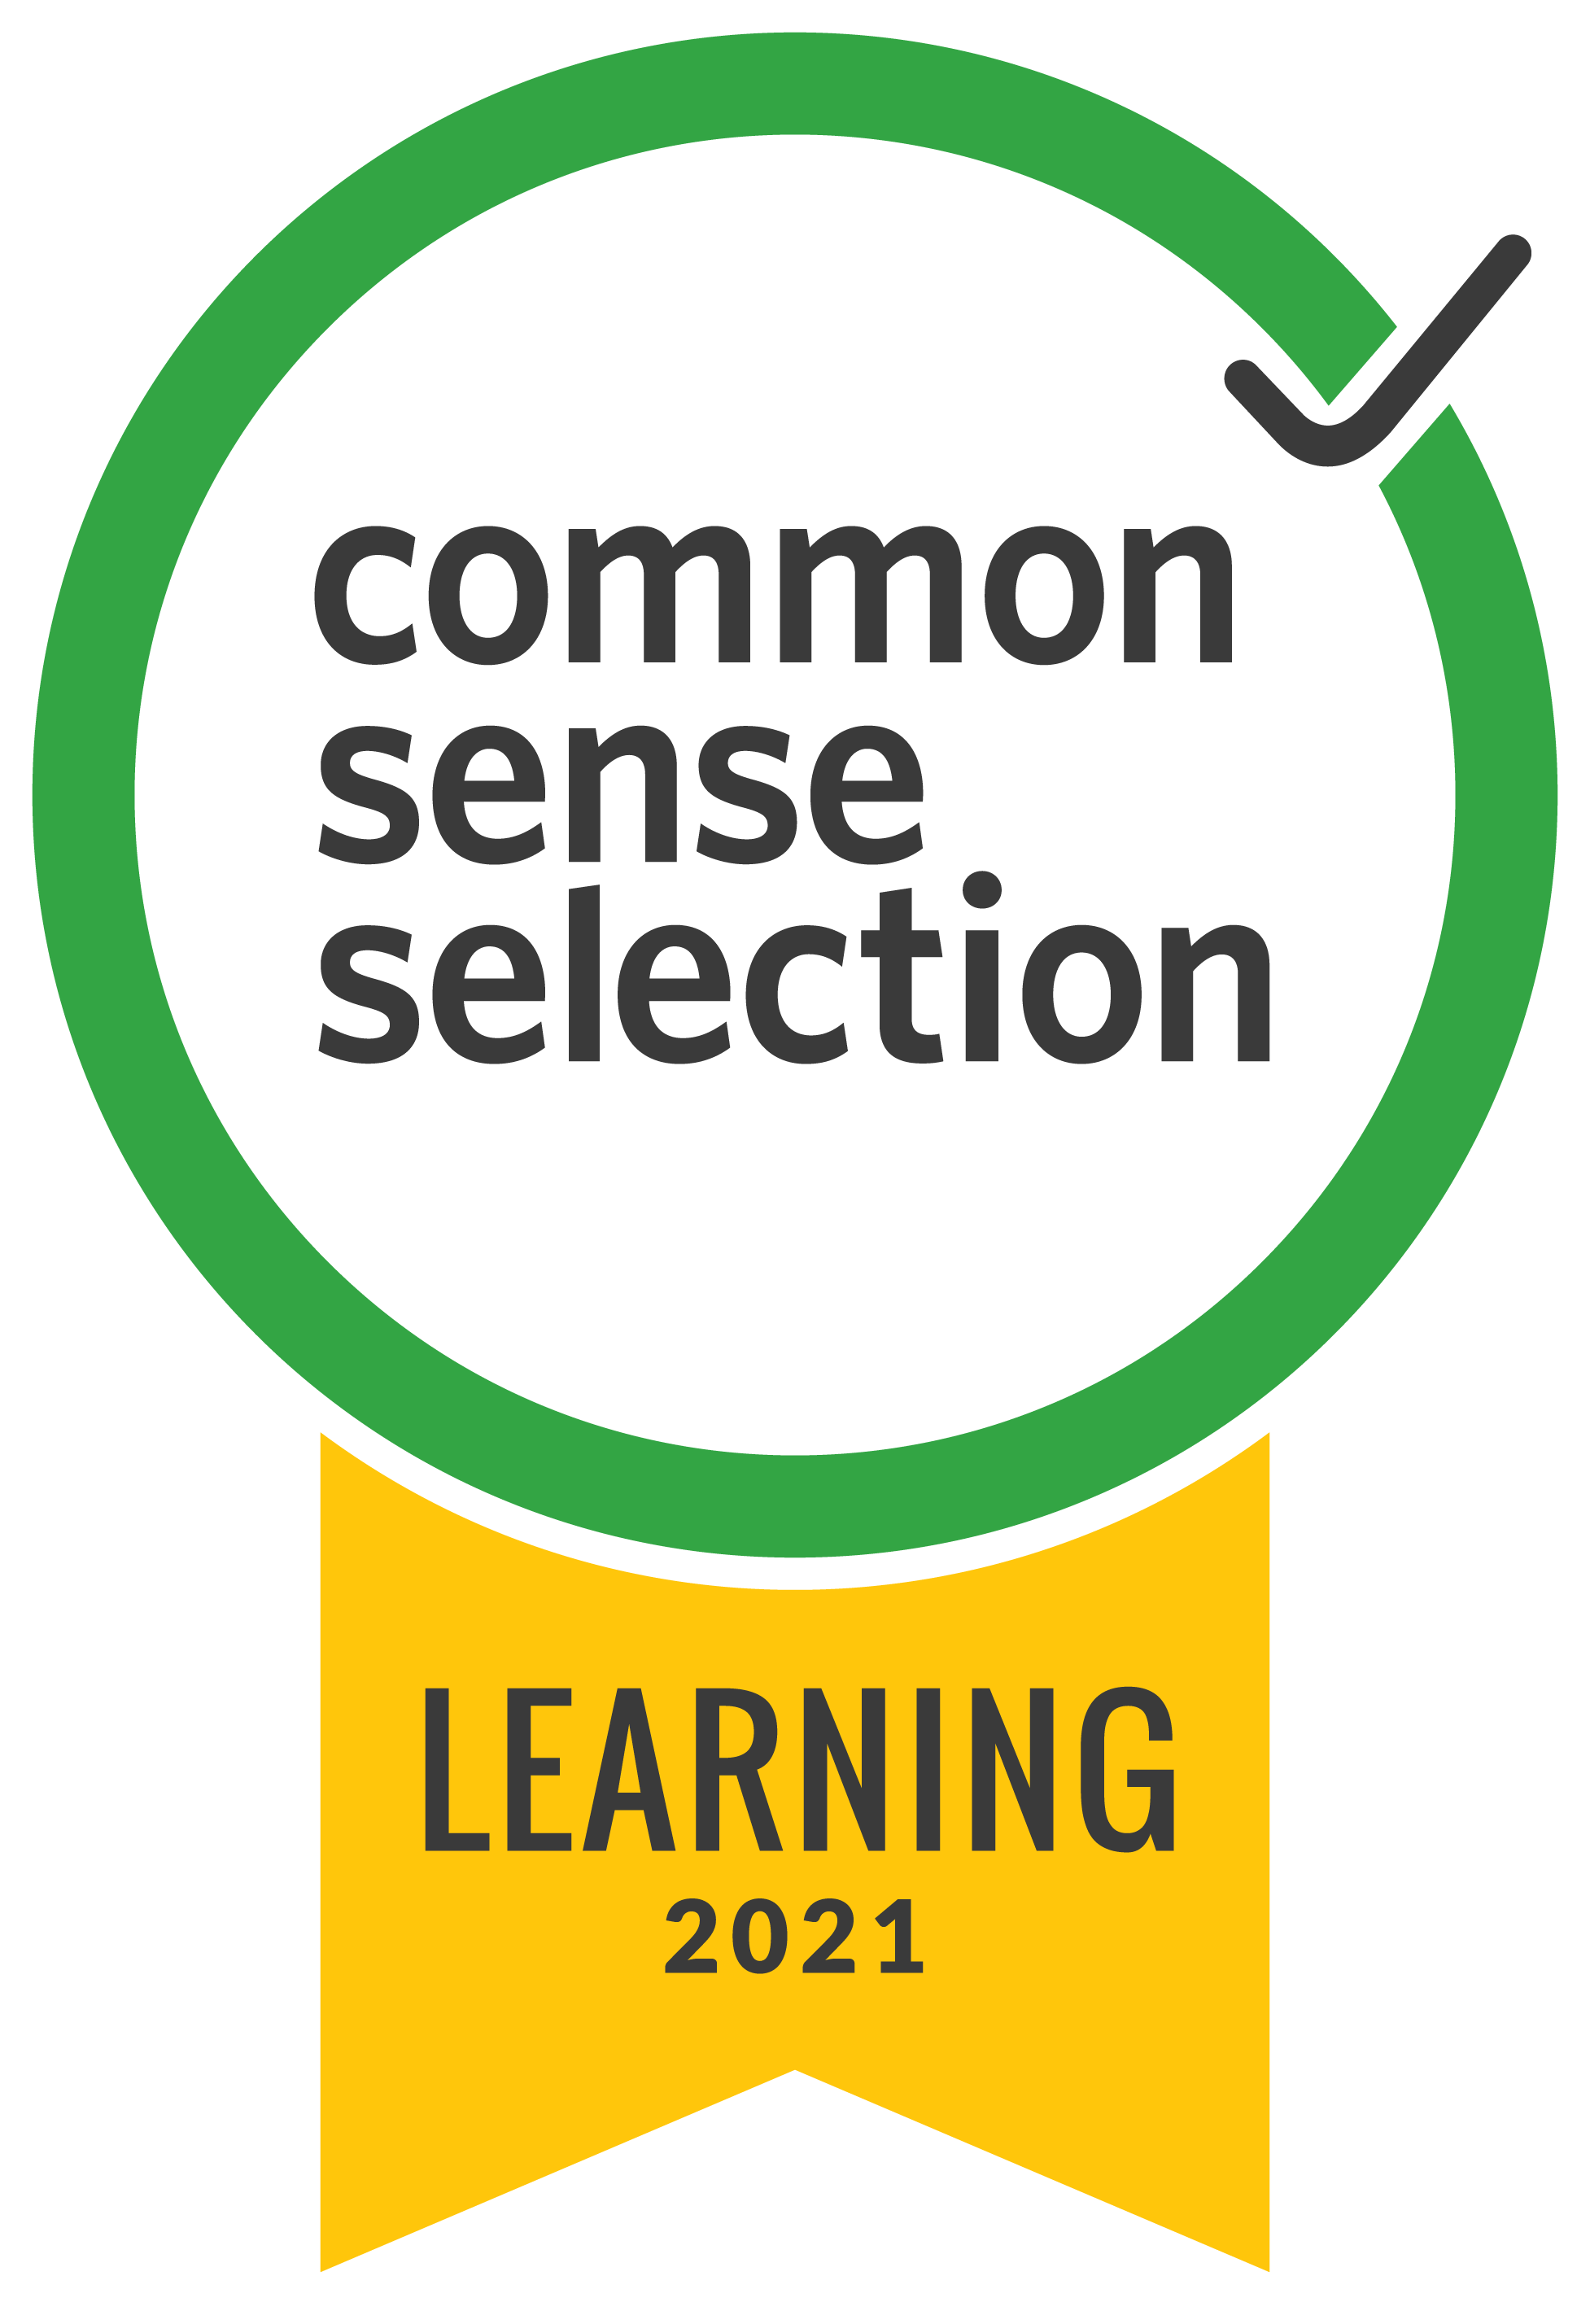 Common Sense Selection for Learning for 2021